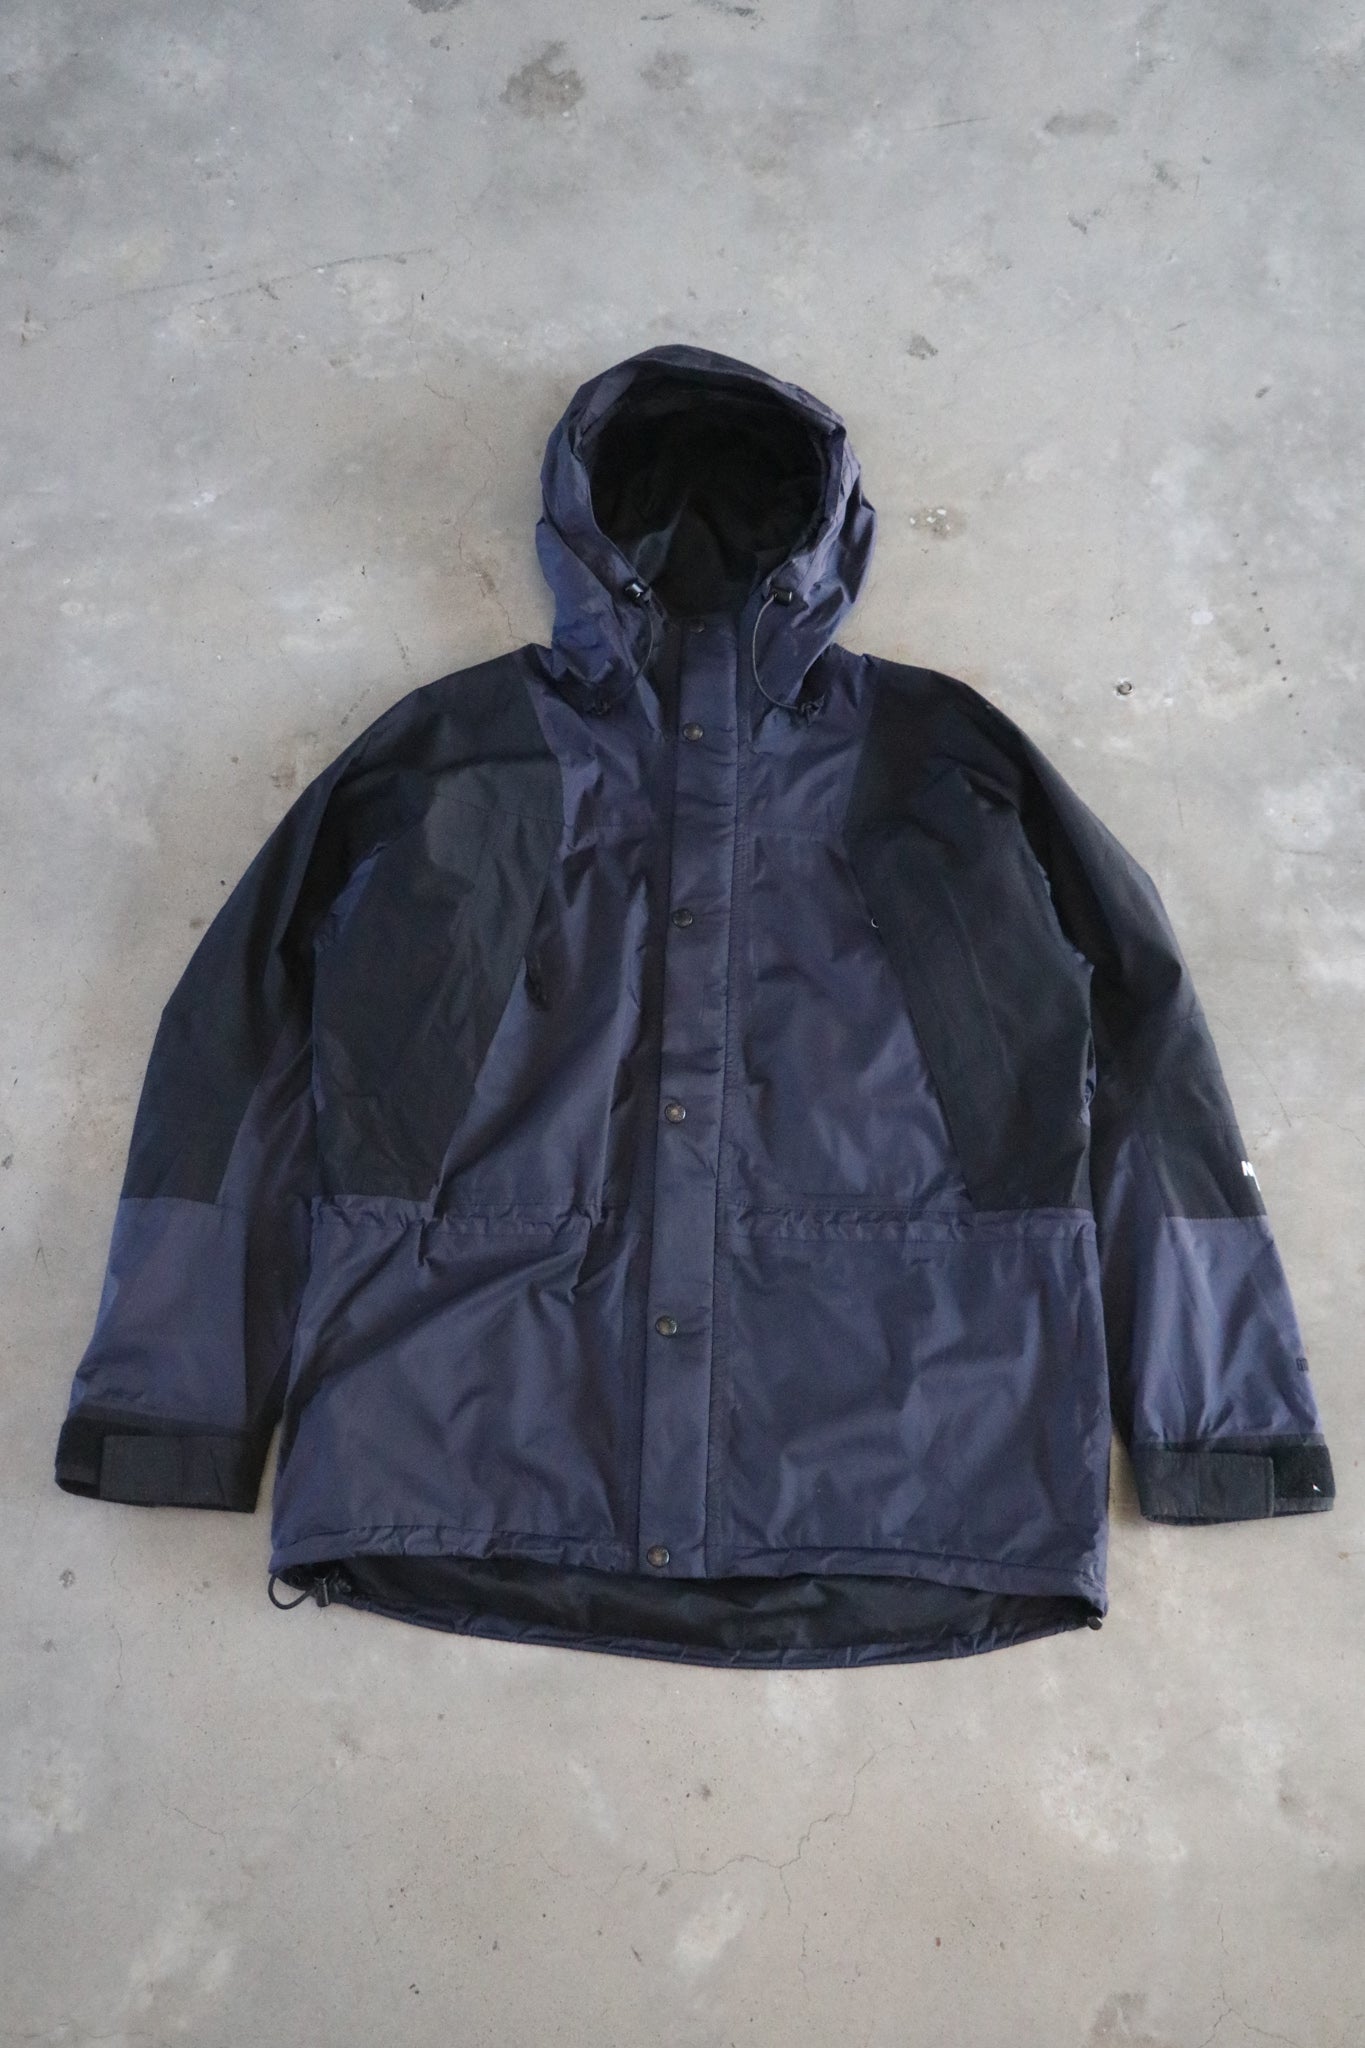 Vintage The North Face Gore-Tex Jacket Large